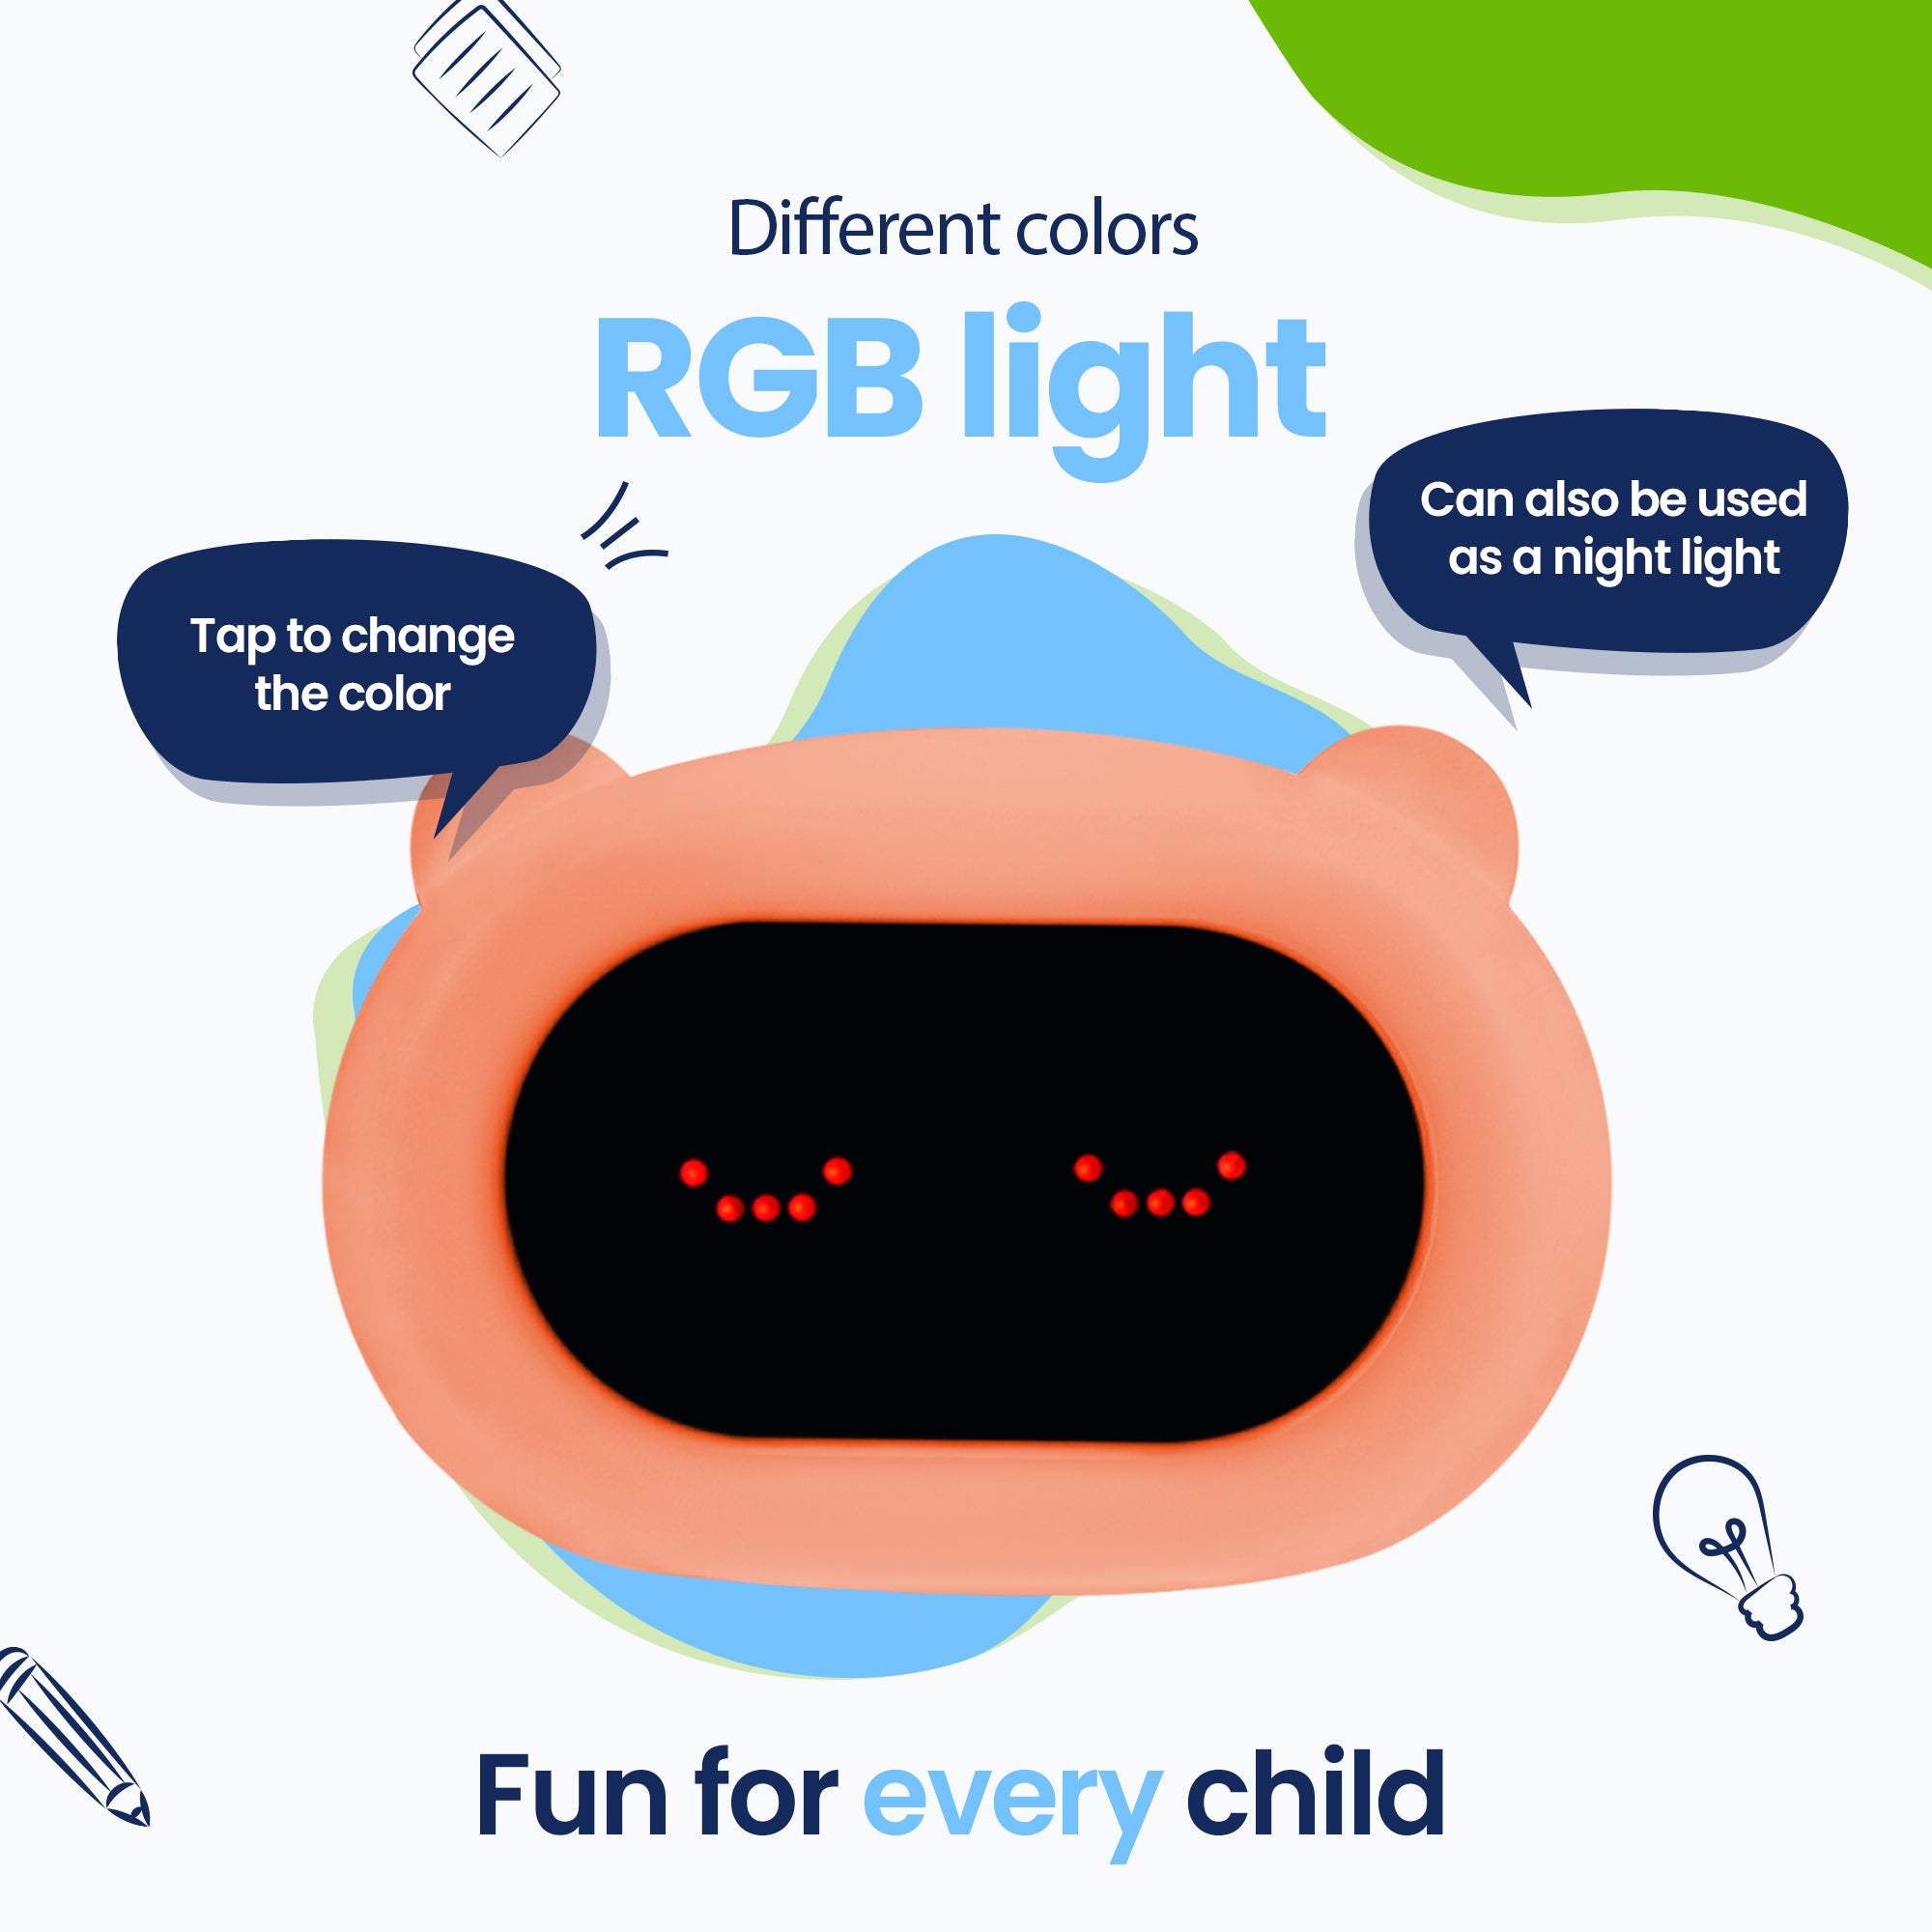 Different colors of RGB light. Tap to change the color! Can also be used as a night light. Fun for every child.